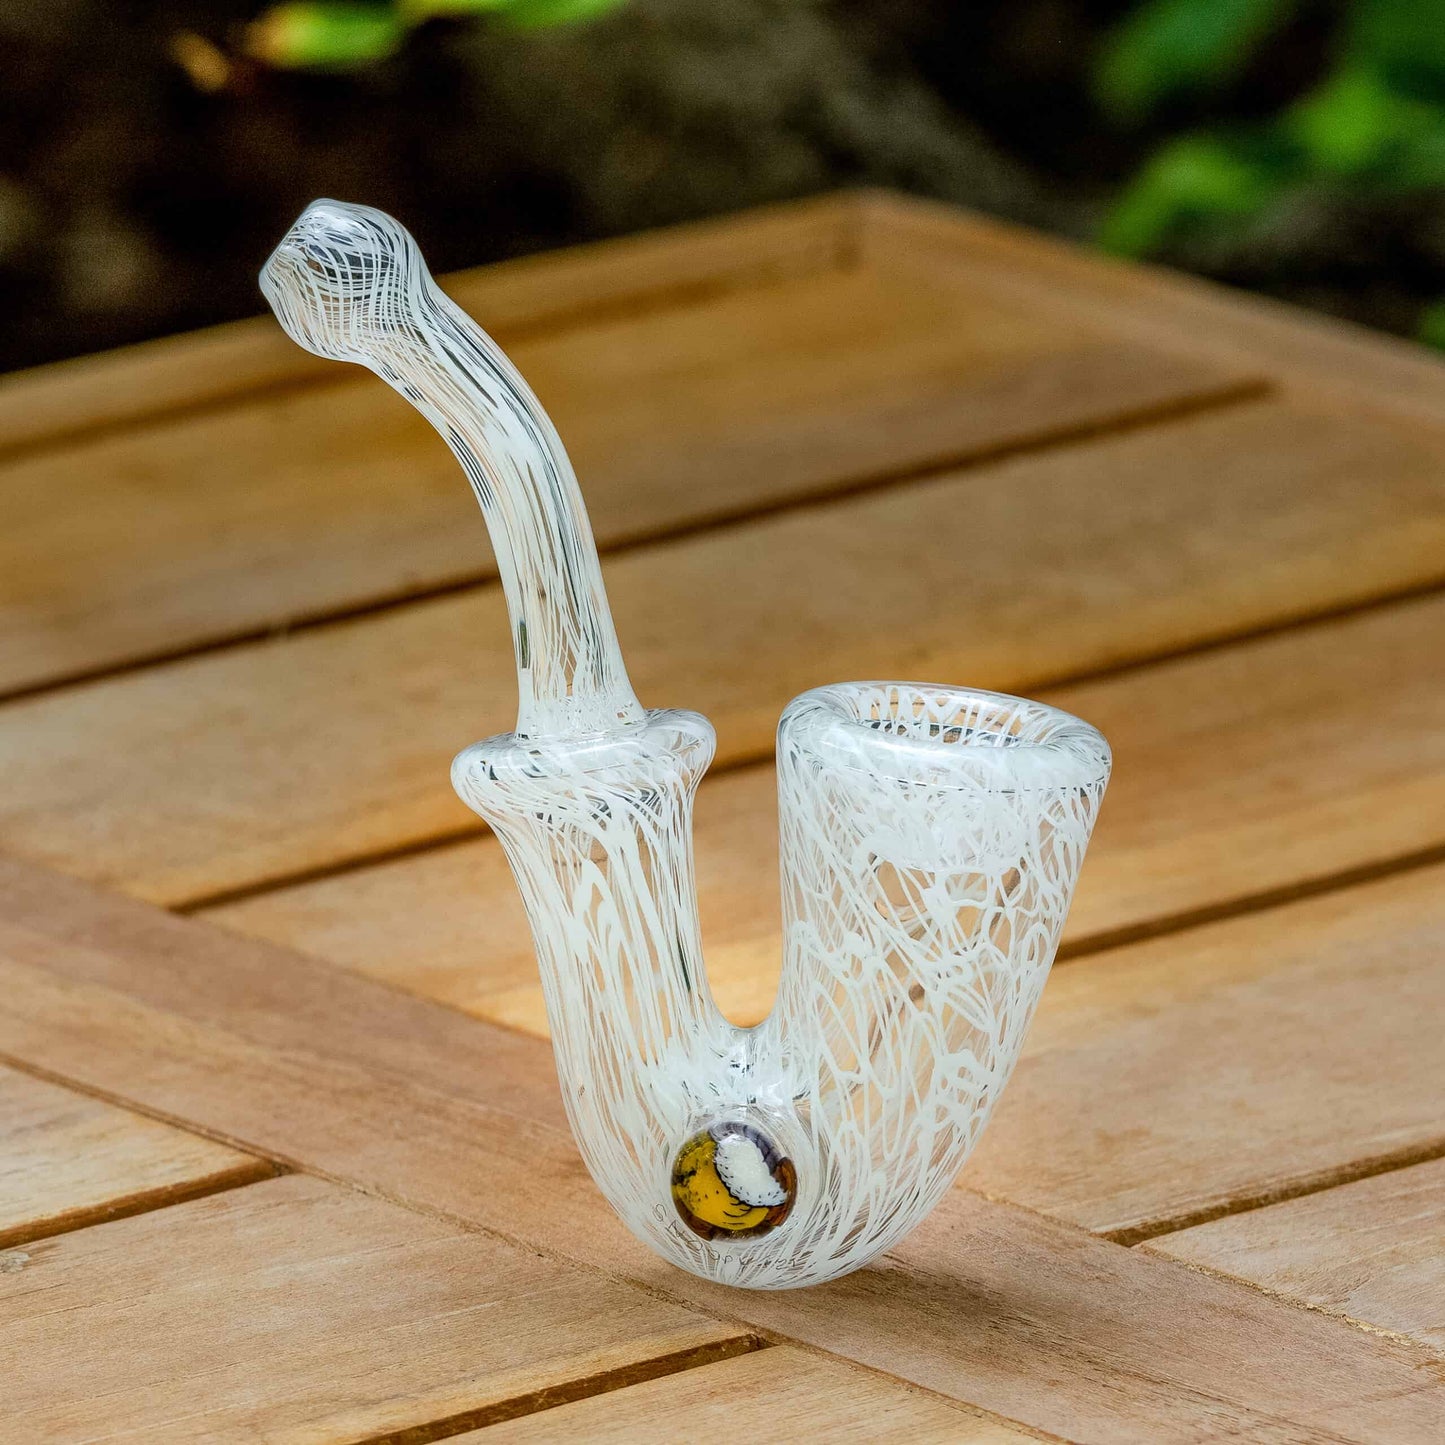 exquisite design of the White Fully Worked Sherlock Dry Pipe (with milli) by Snoopy Glass